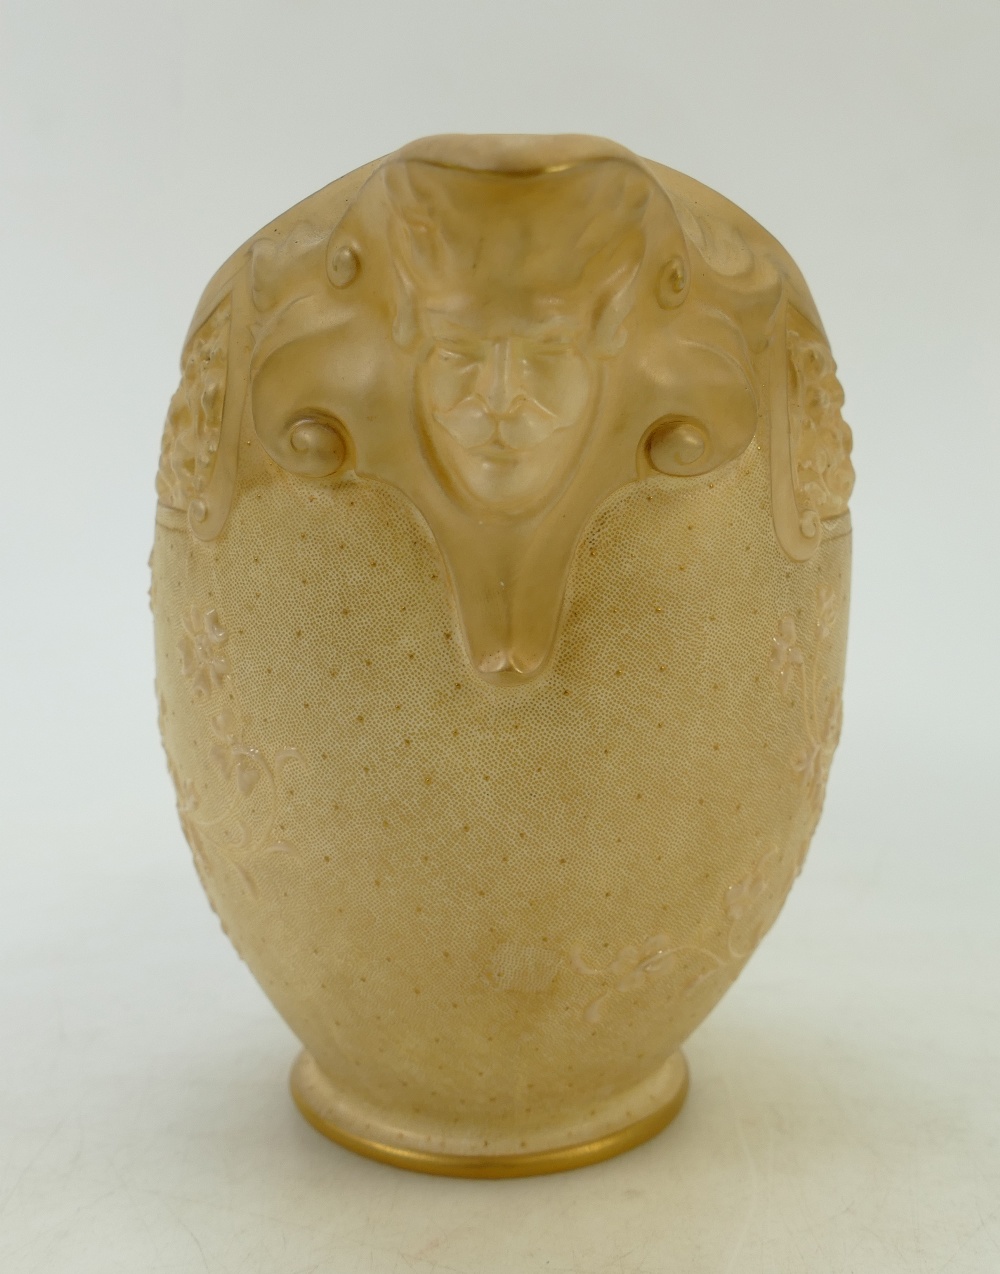 Doulton Burslem Jug: Doulton Burslem ewer decorated all around with flowers and mask head to spout, - Image 5 of 6